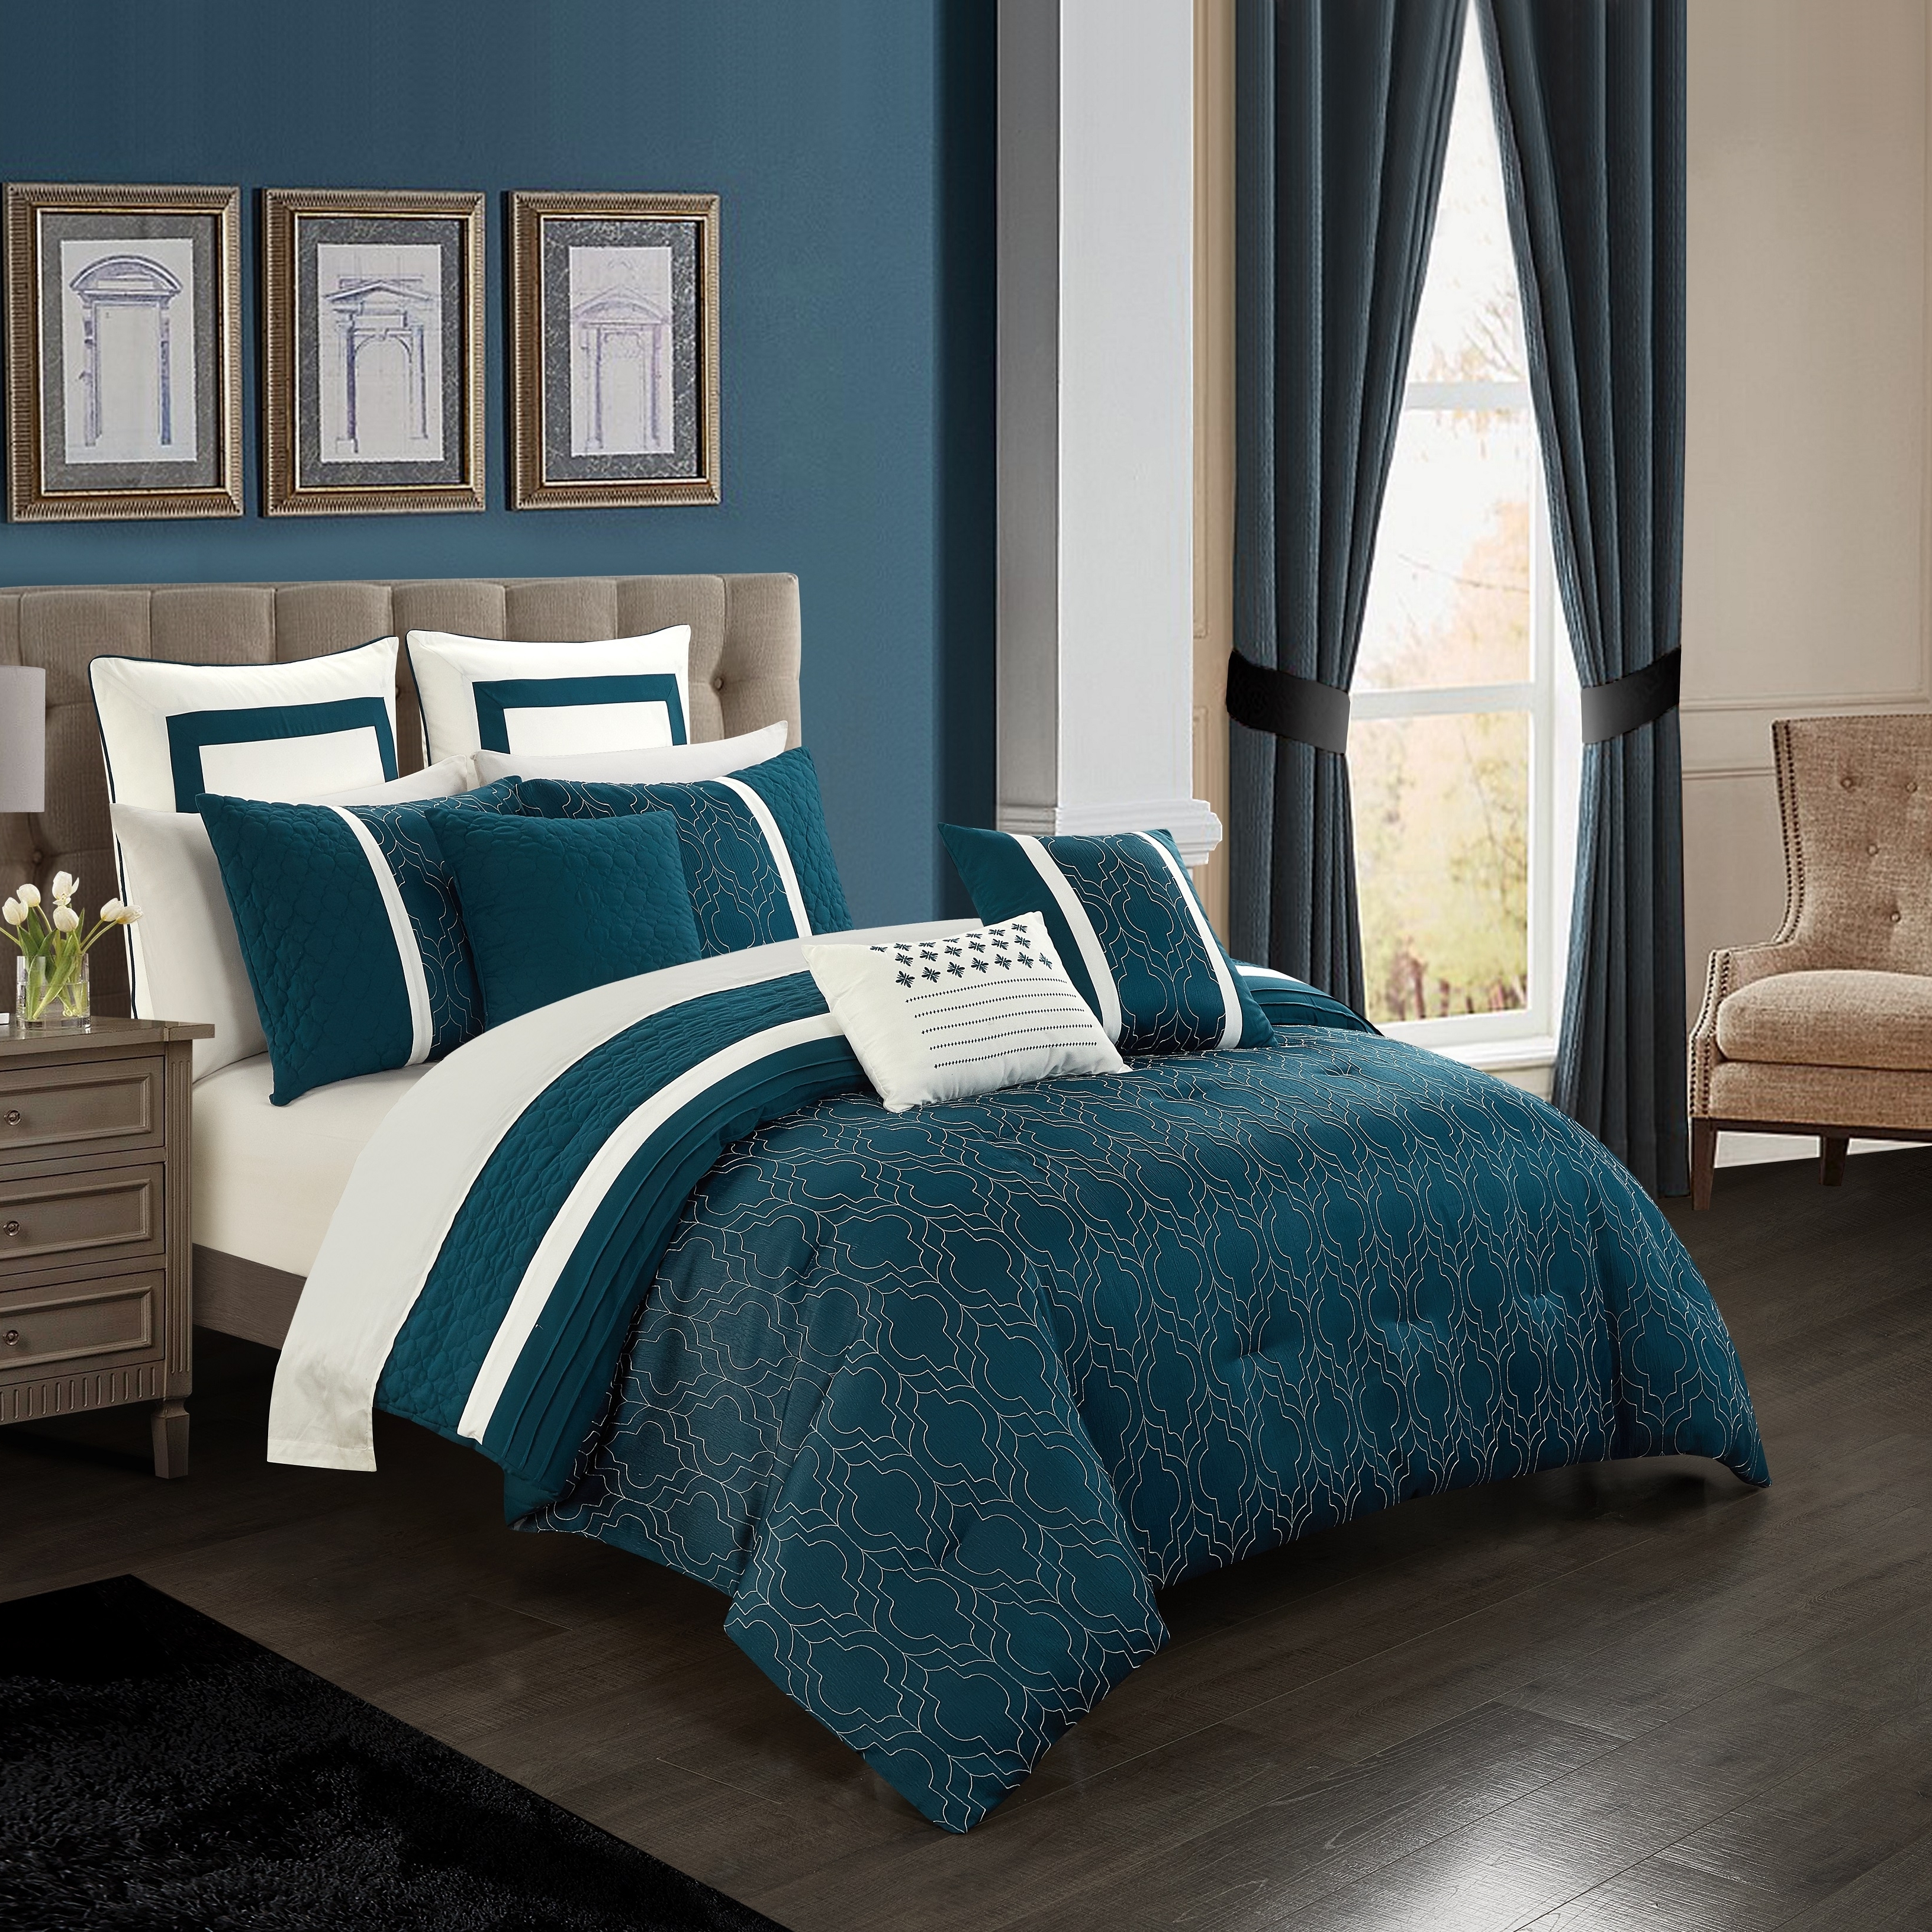 Arlow 8 Piece Comforter Set Jacquard Geometric Quilted Pattern Design Bedding - Teal, Queen